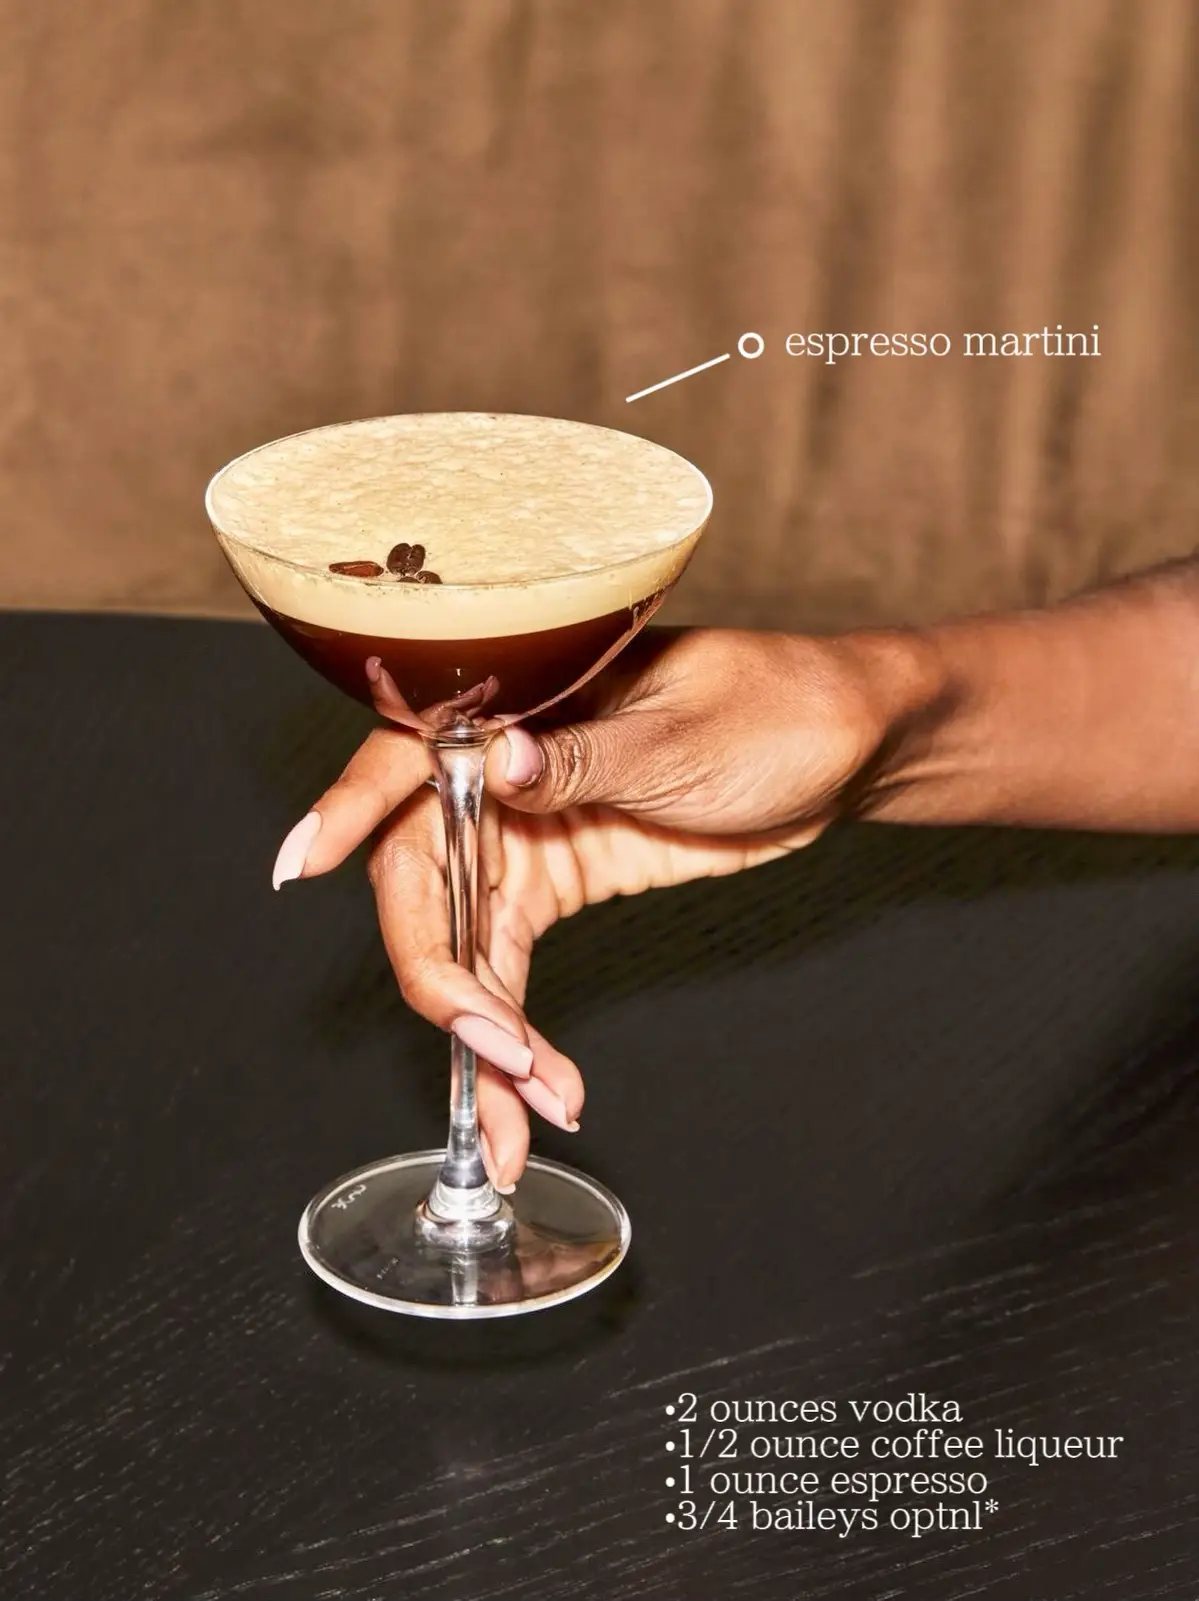  A hand holding a glass of espresso martini with a slice of lemon on top.